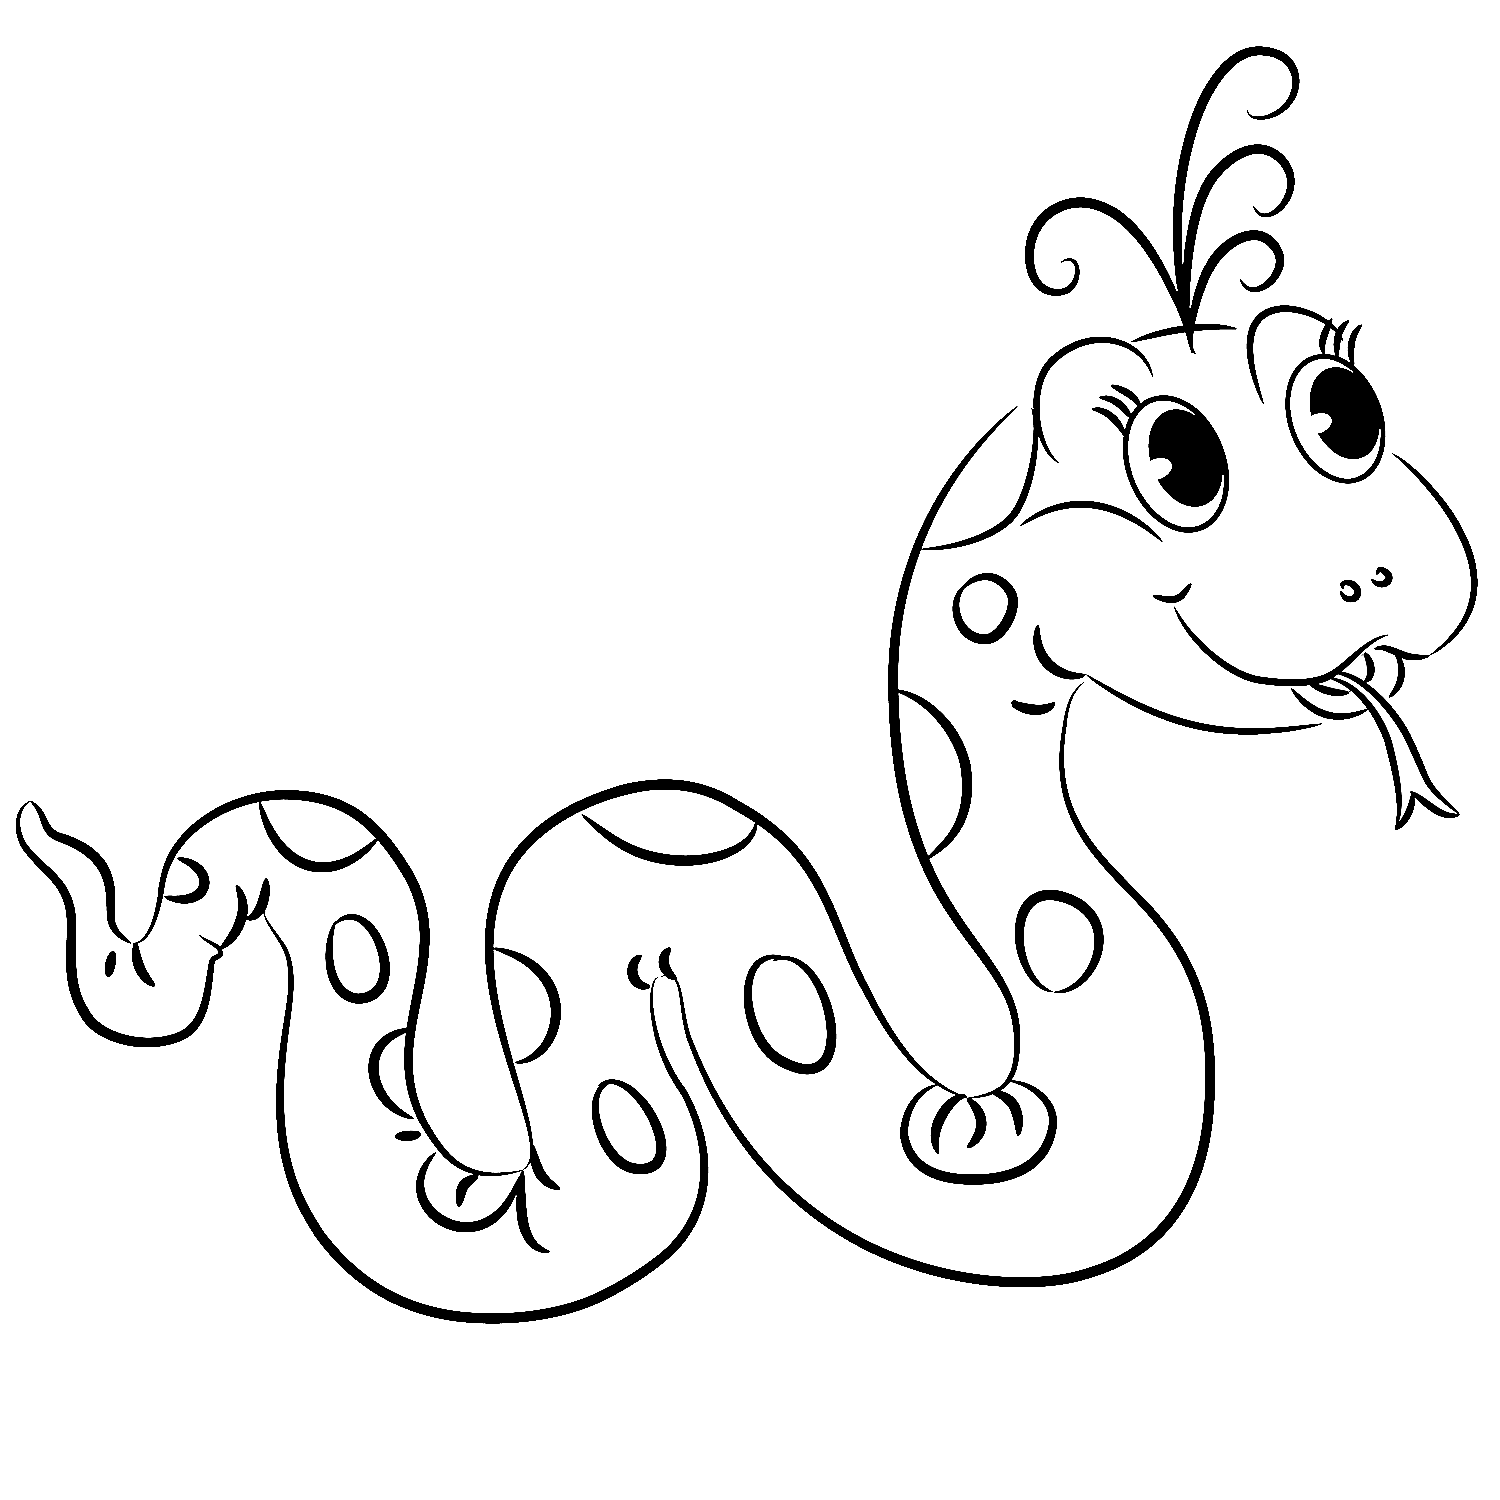 snake colouring pages snake coloring pages free for children pages colouring snake 